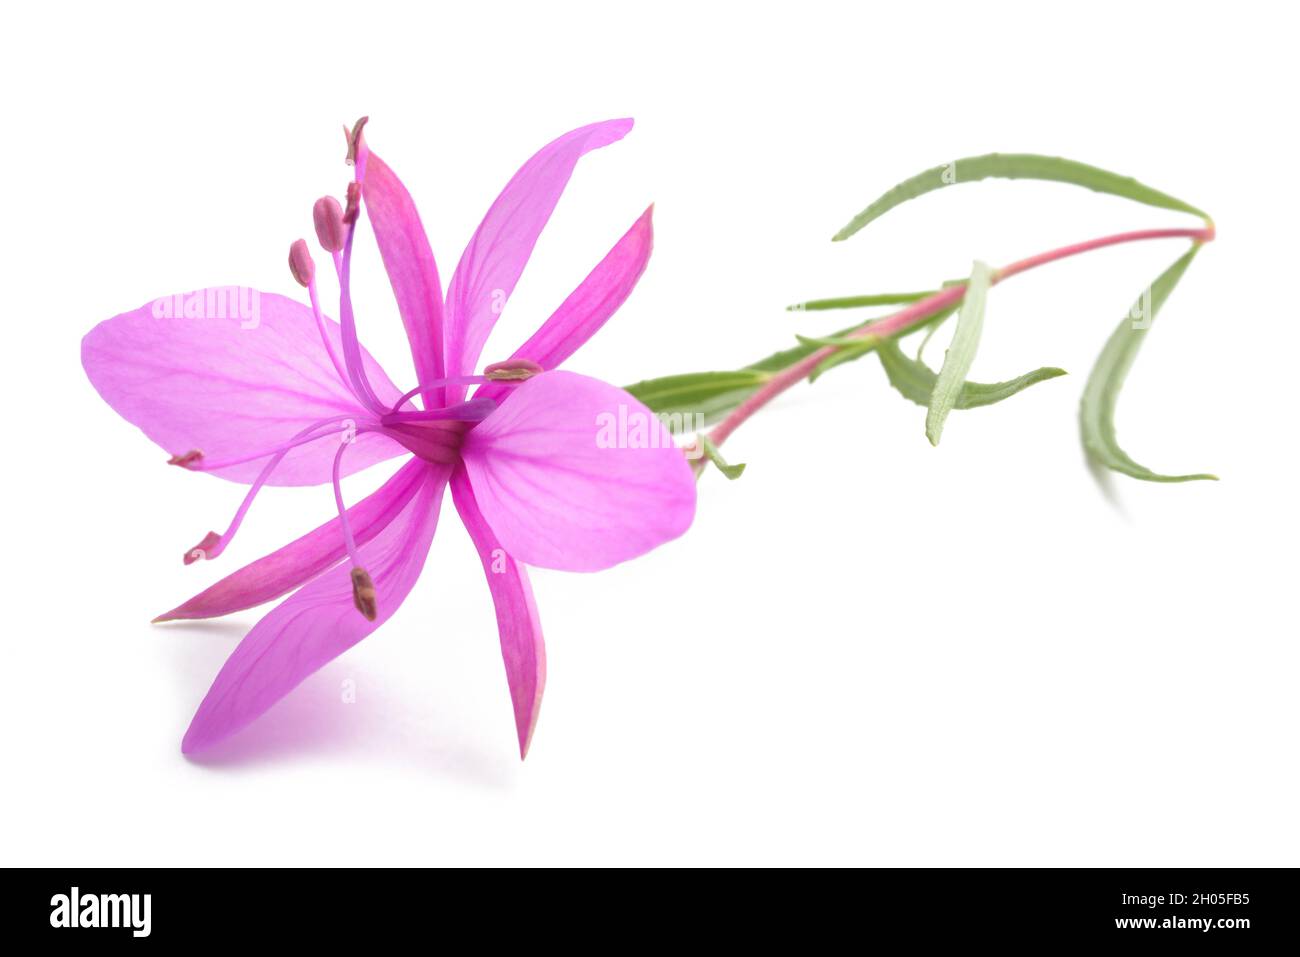 Pink Alpine willowherb flower isolated on white Stock Photo